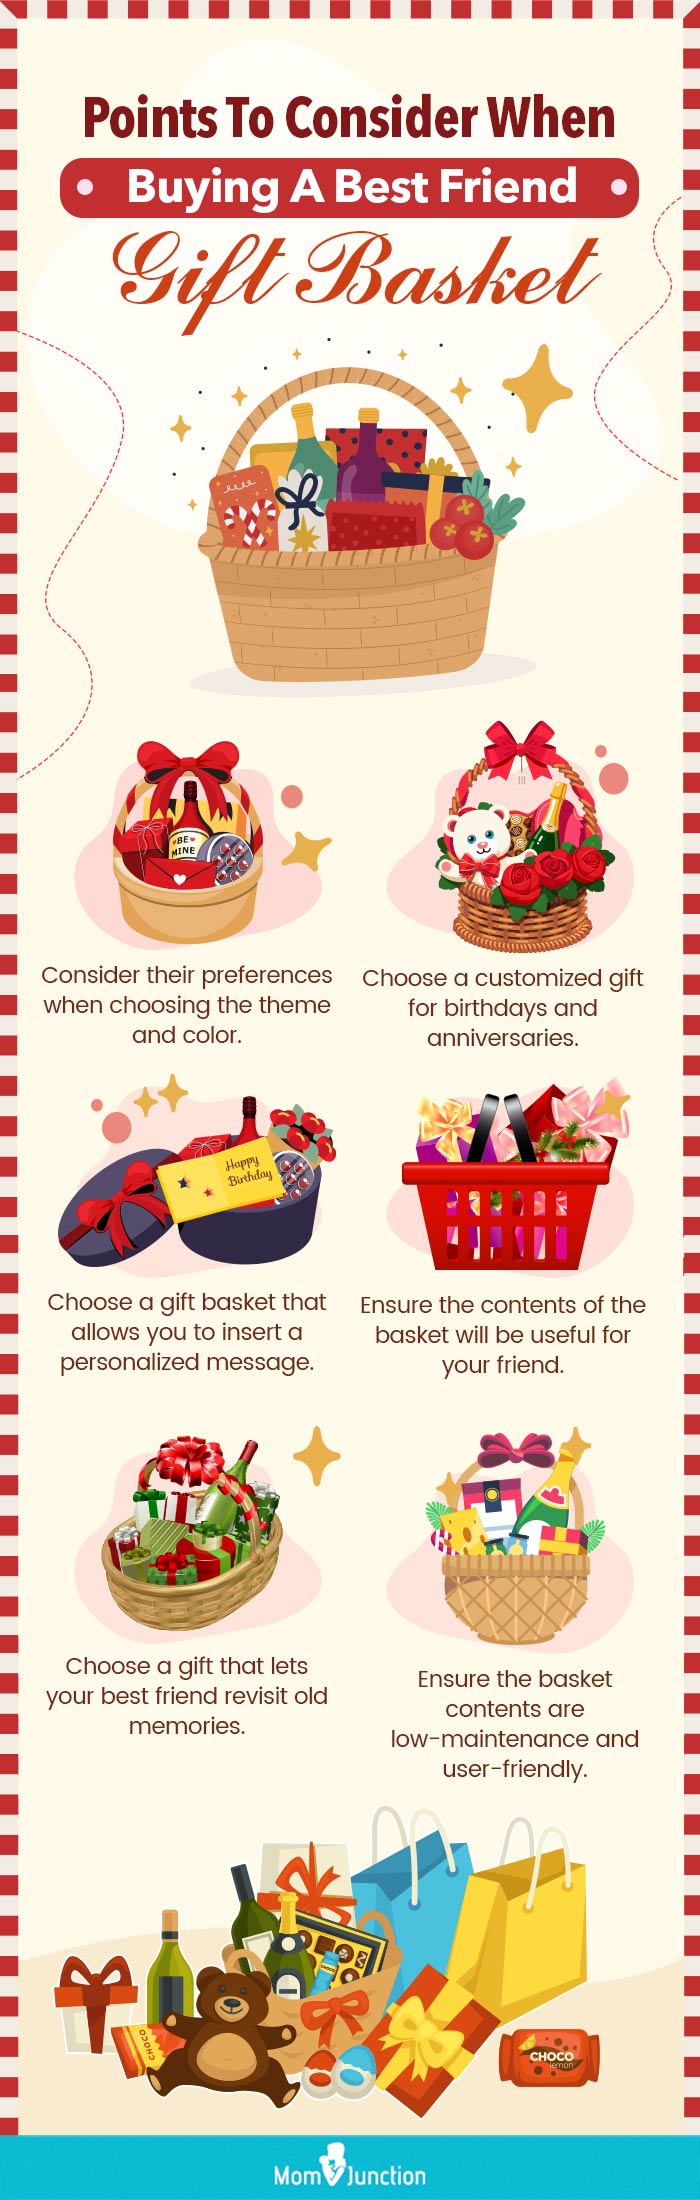 Points To Consider When Buying A Best Friend Gift Basket (infographic)